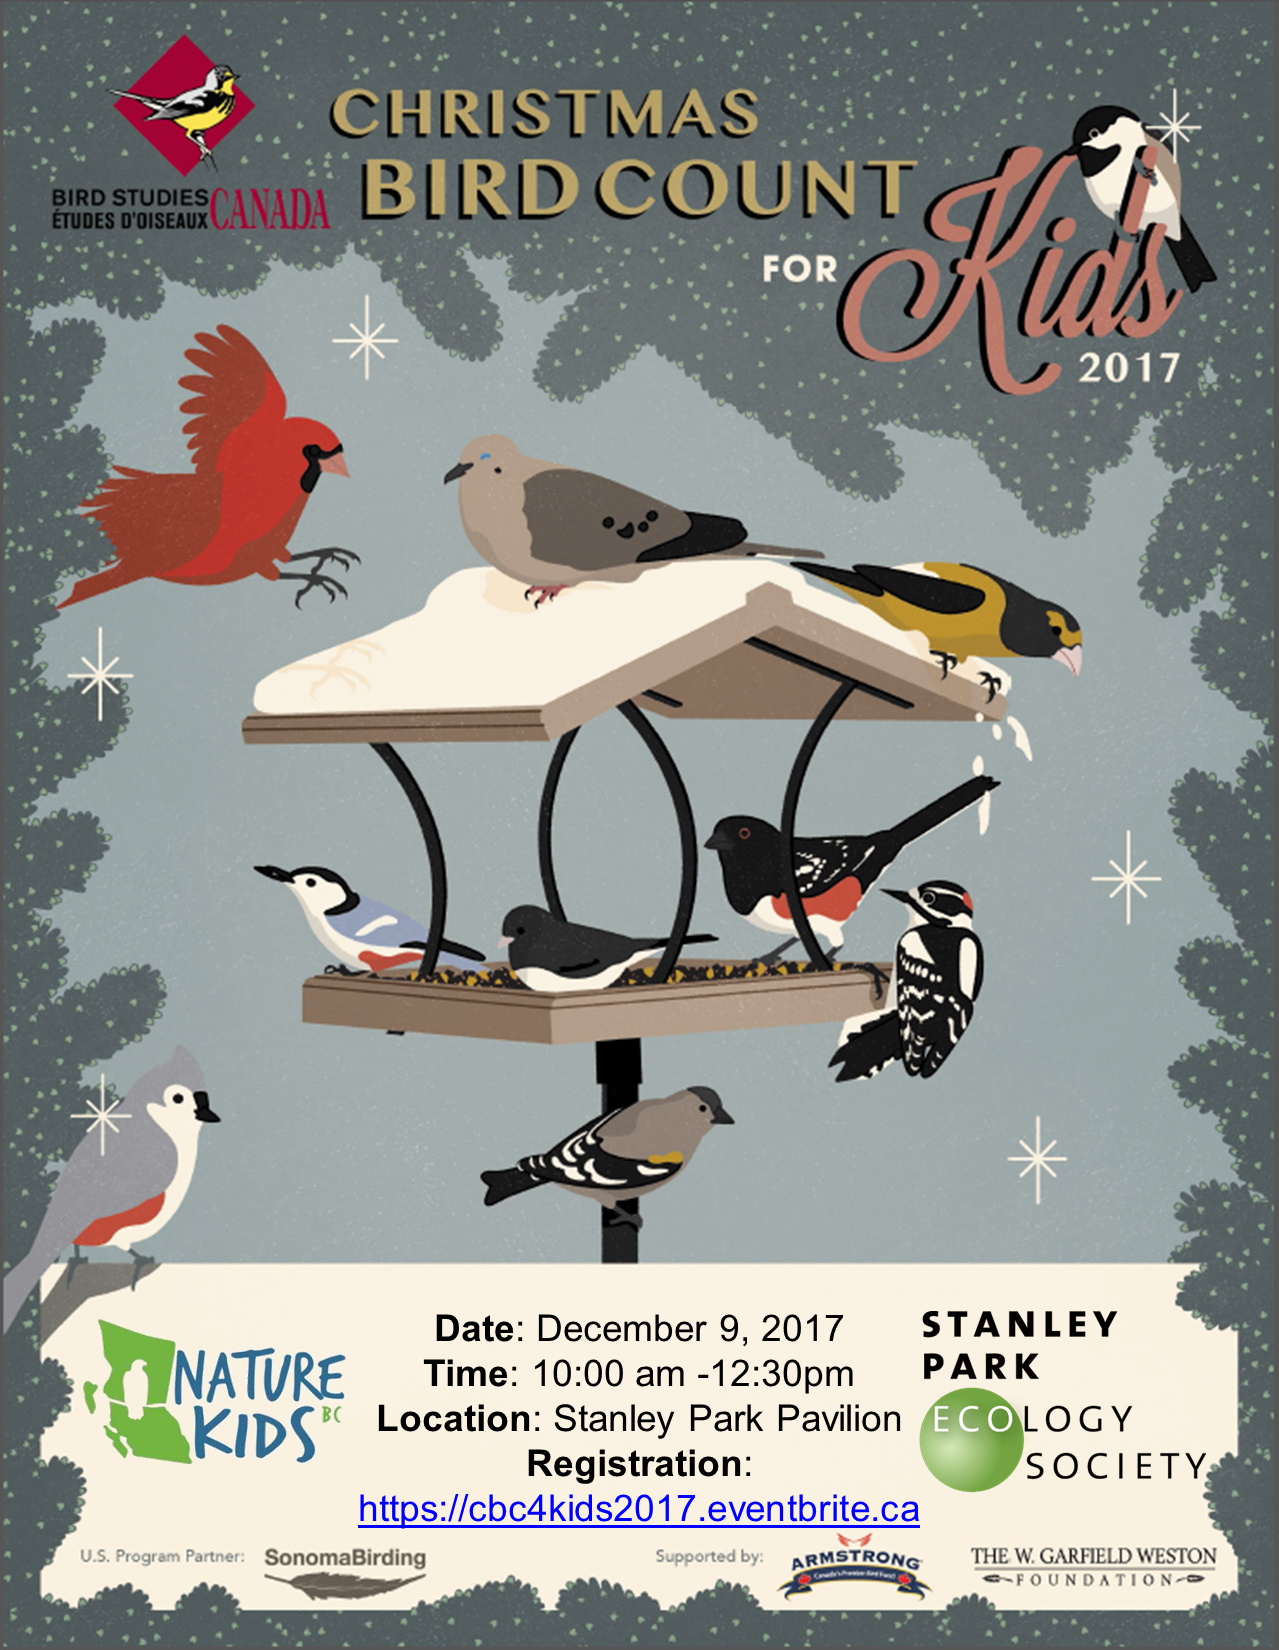 Come birding with us this winter and contribute to citizen science